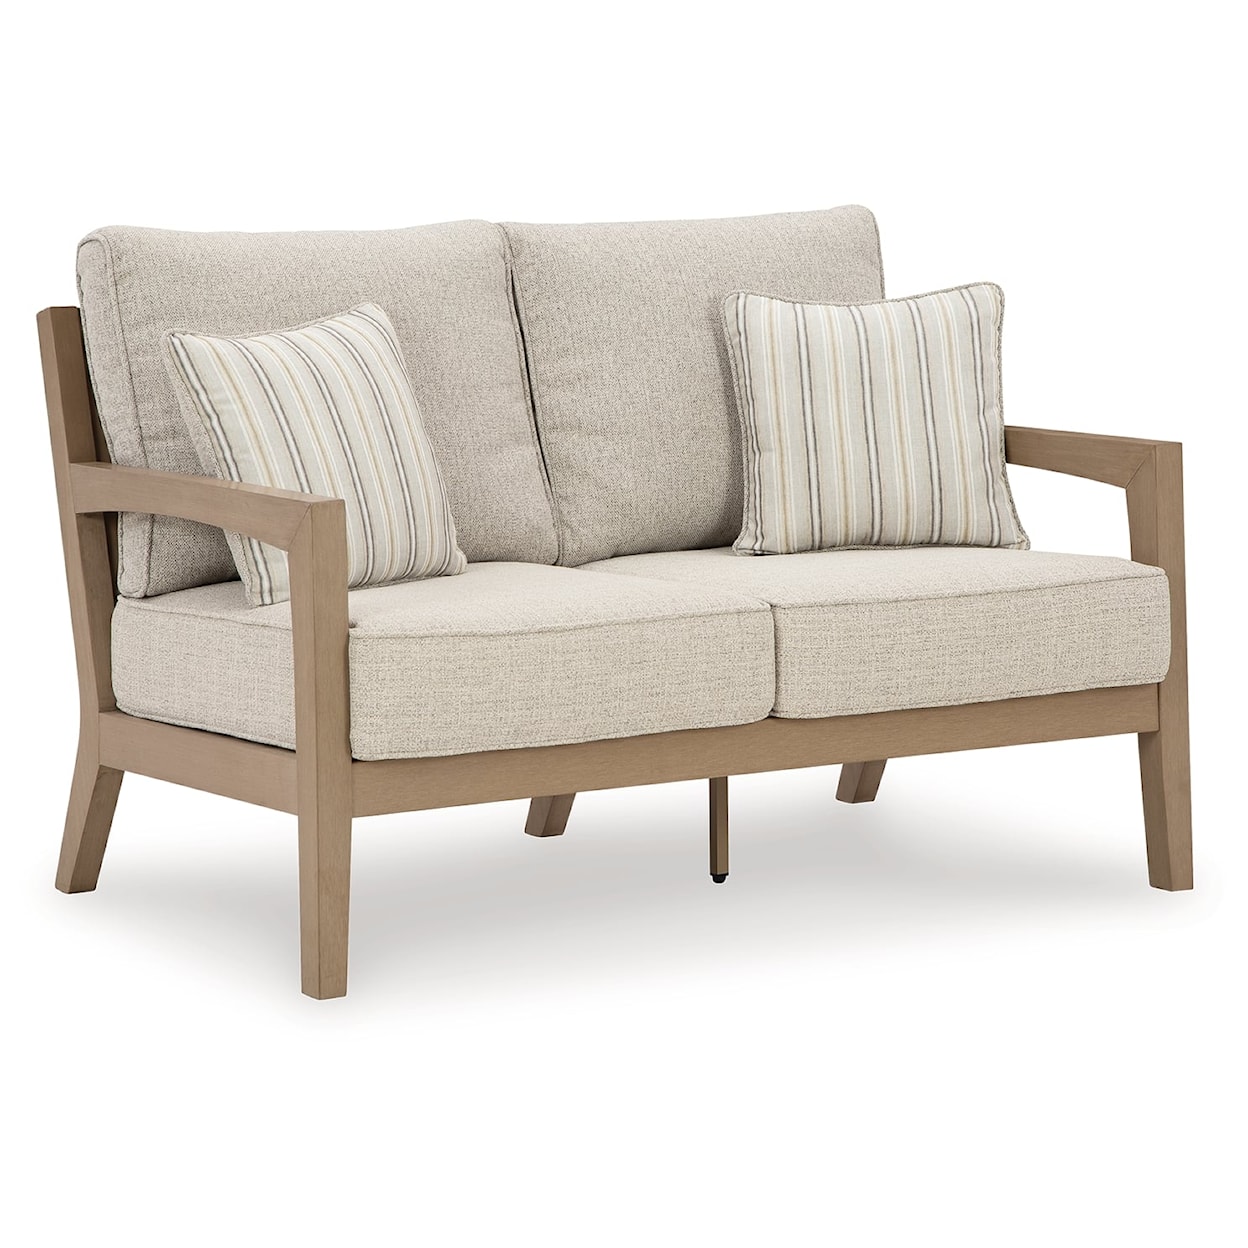 Michael Alan Select Hallow Creek Outdoor Loveseat with Cushion